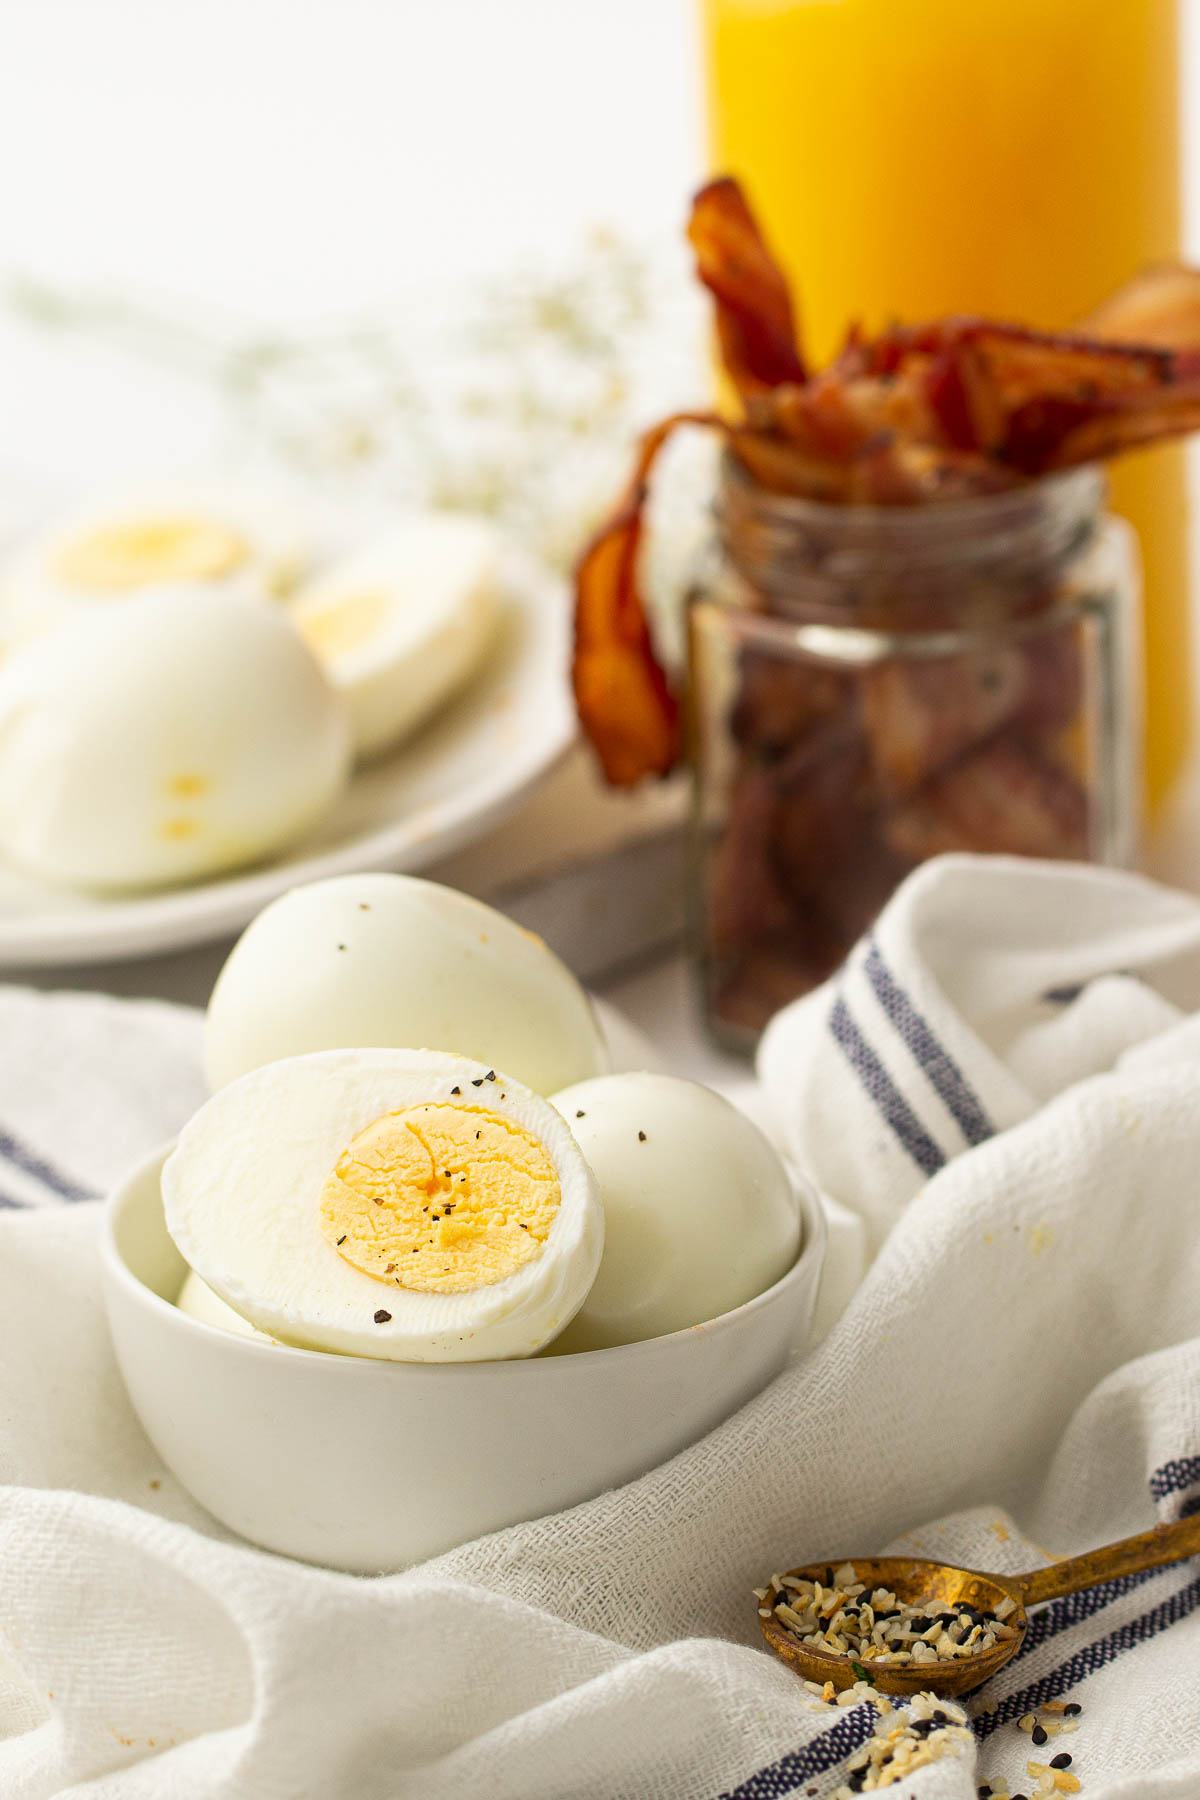 Air fryer hard boiled eggs shown in a white bowl, with a cup of cooked bacon slices in the background.